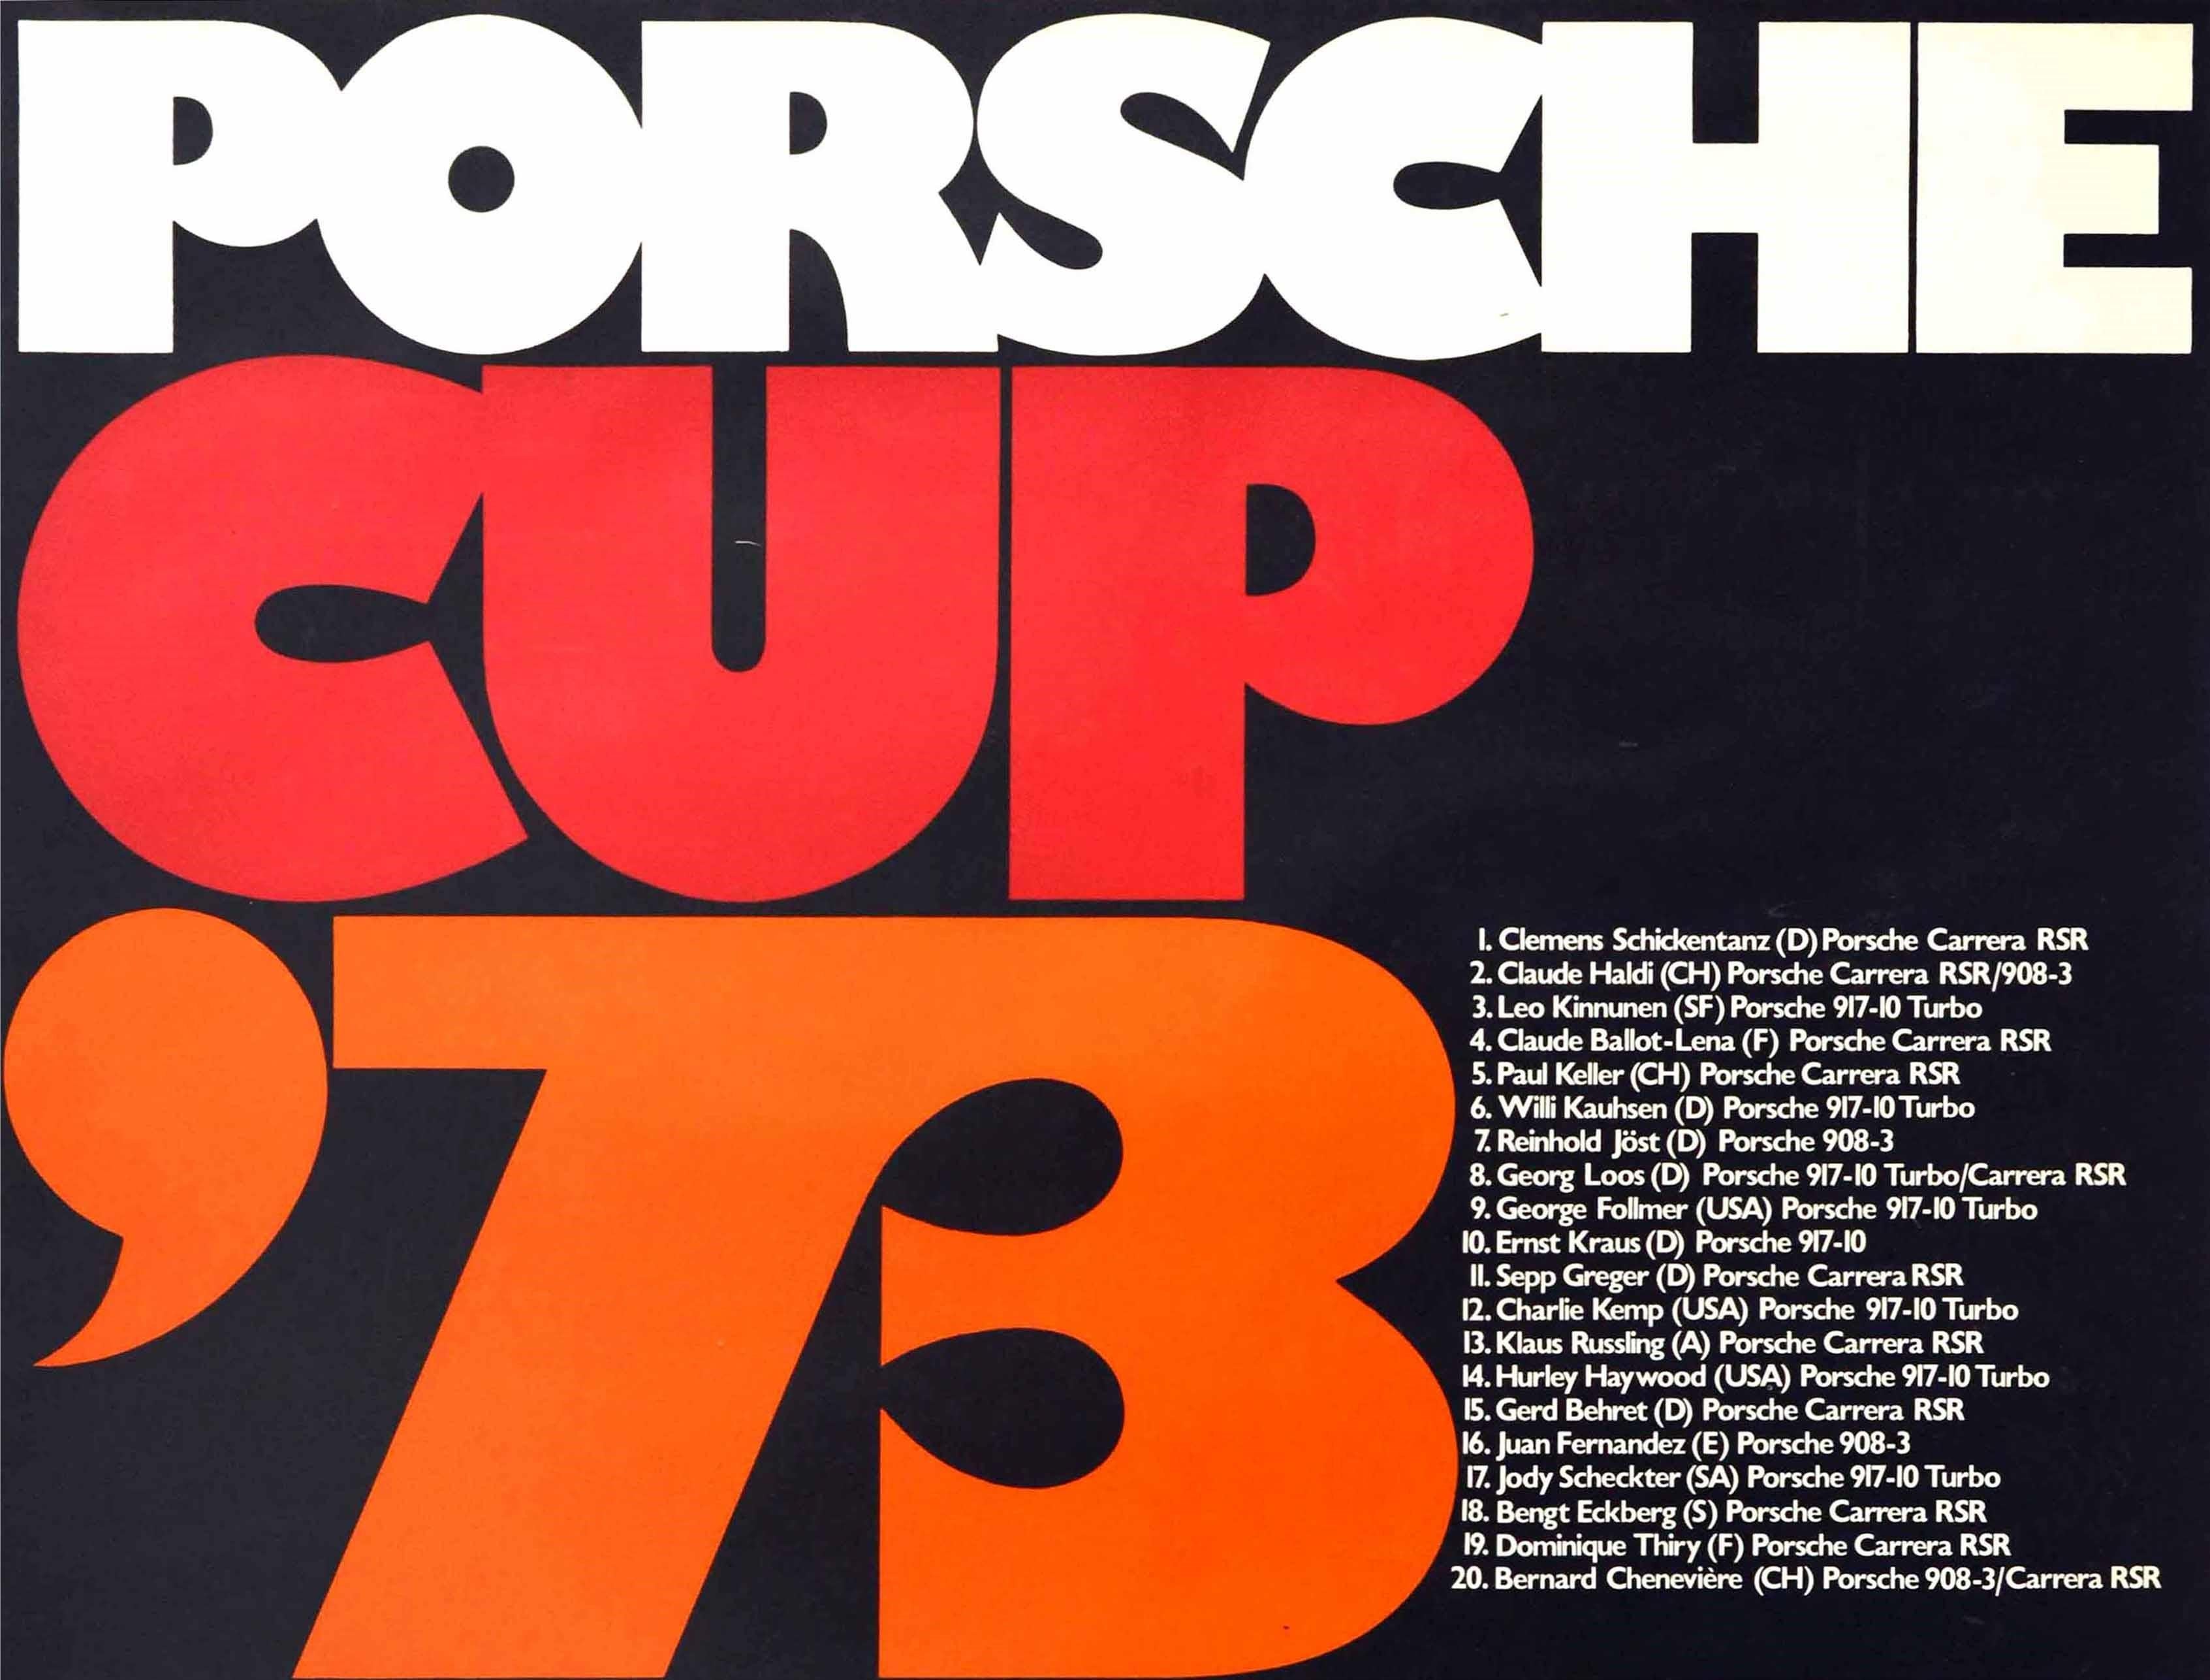 Original vintage Porsche victory advertising poster - Porsche Cup 1973 Cup for GT Cars - featuring a great design by Erich Strenger (1922-1993) showing a photo of a Porsche sports car numbered 21 racing around a track in front of spectators with the